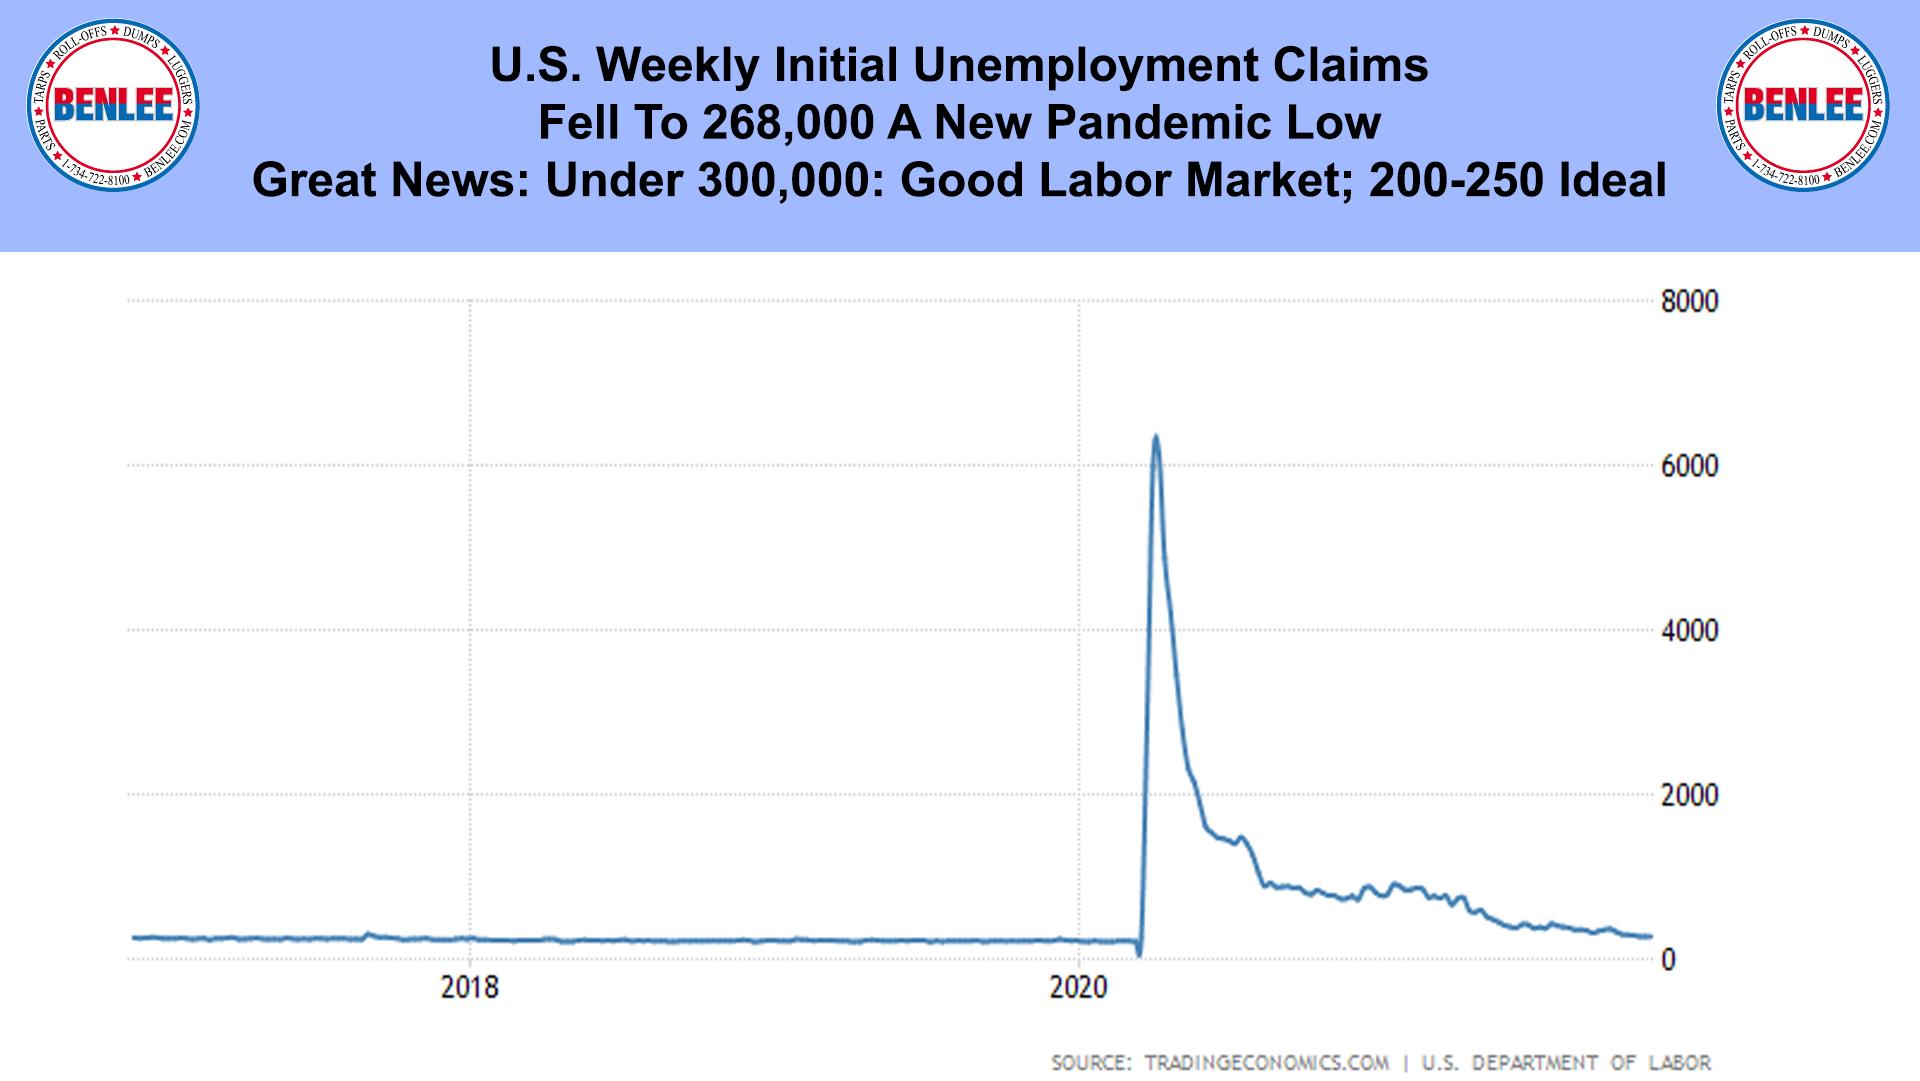 U.S. Weekly Initial Unemployment Claims